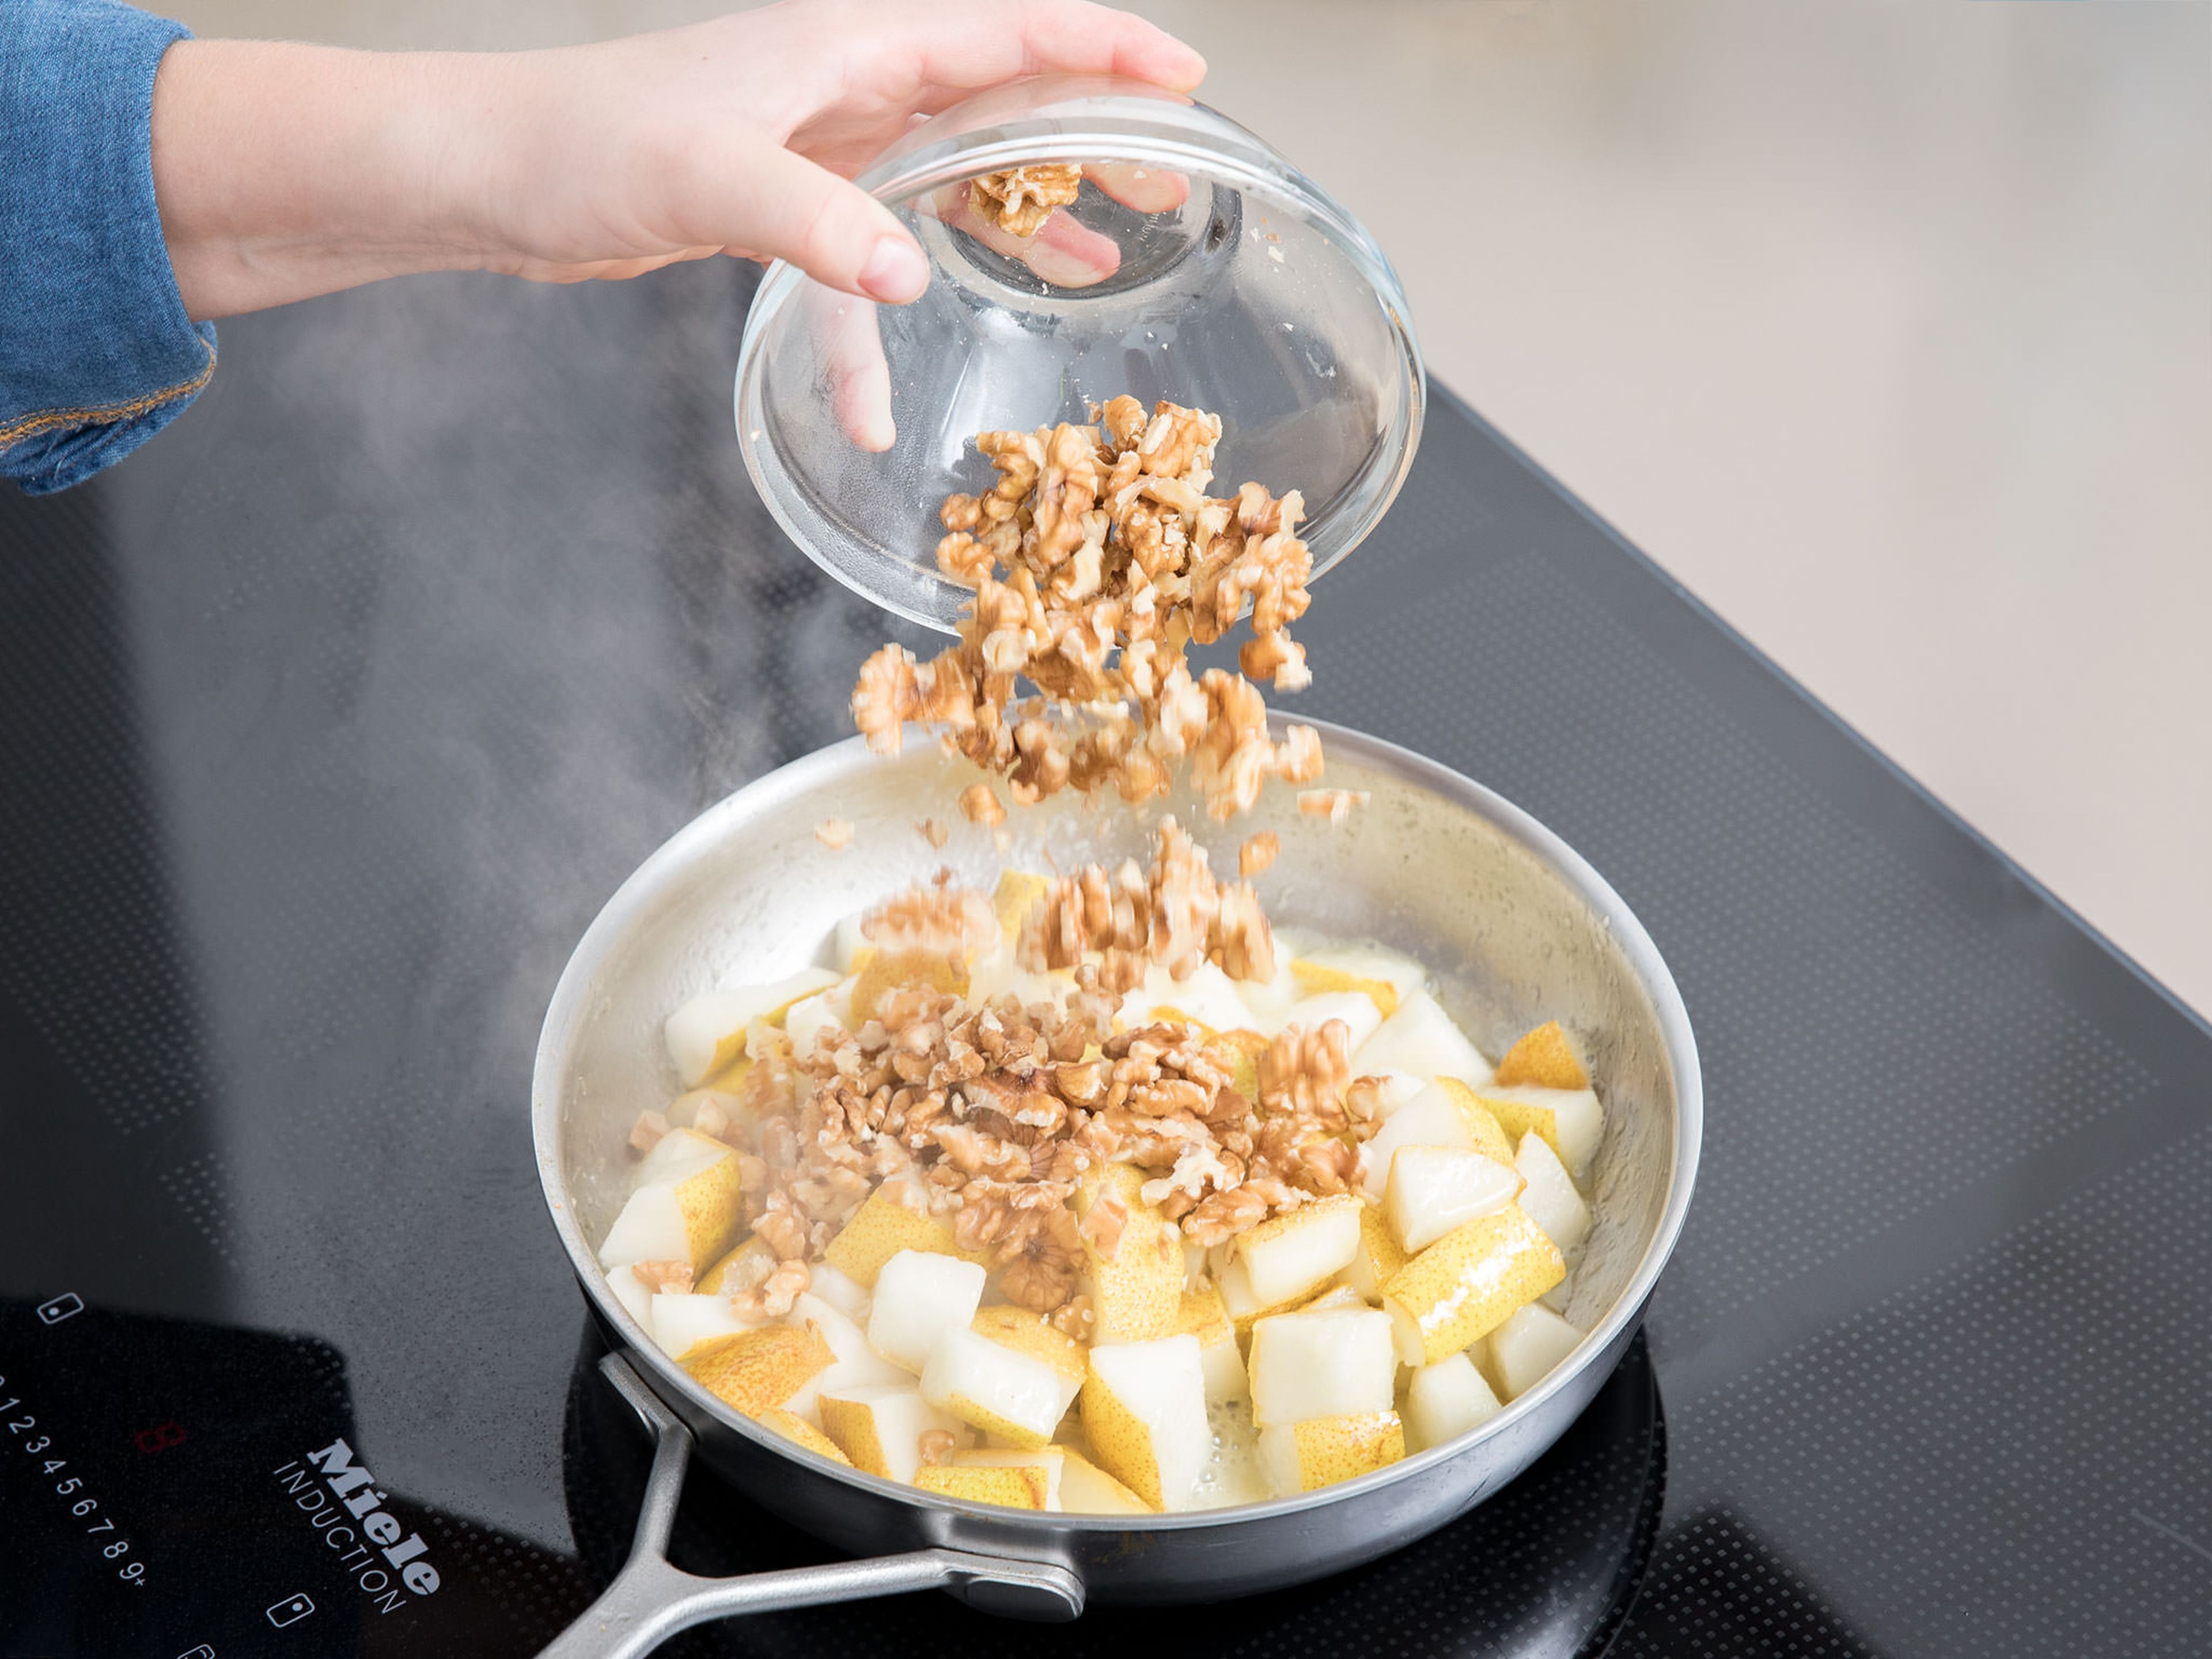 Melt the butter in a large frying pan over medium heat, add diced pear, and sauté for approx. 3 – 5 min. Add the sugar and let it caramelize before adding the walnuts. Stir well to coat the pears and walnuts in the caramelized liquid. Remove the pan from the heat and set aside to cool a little.